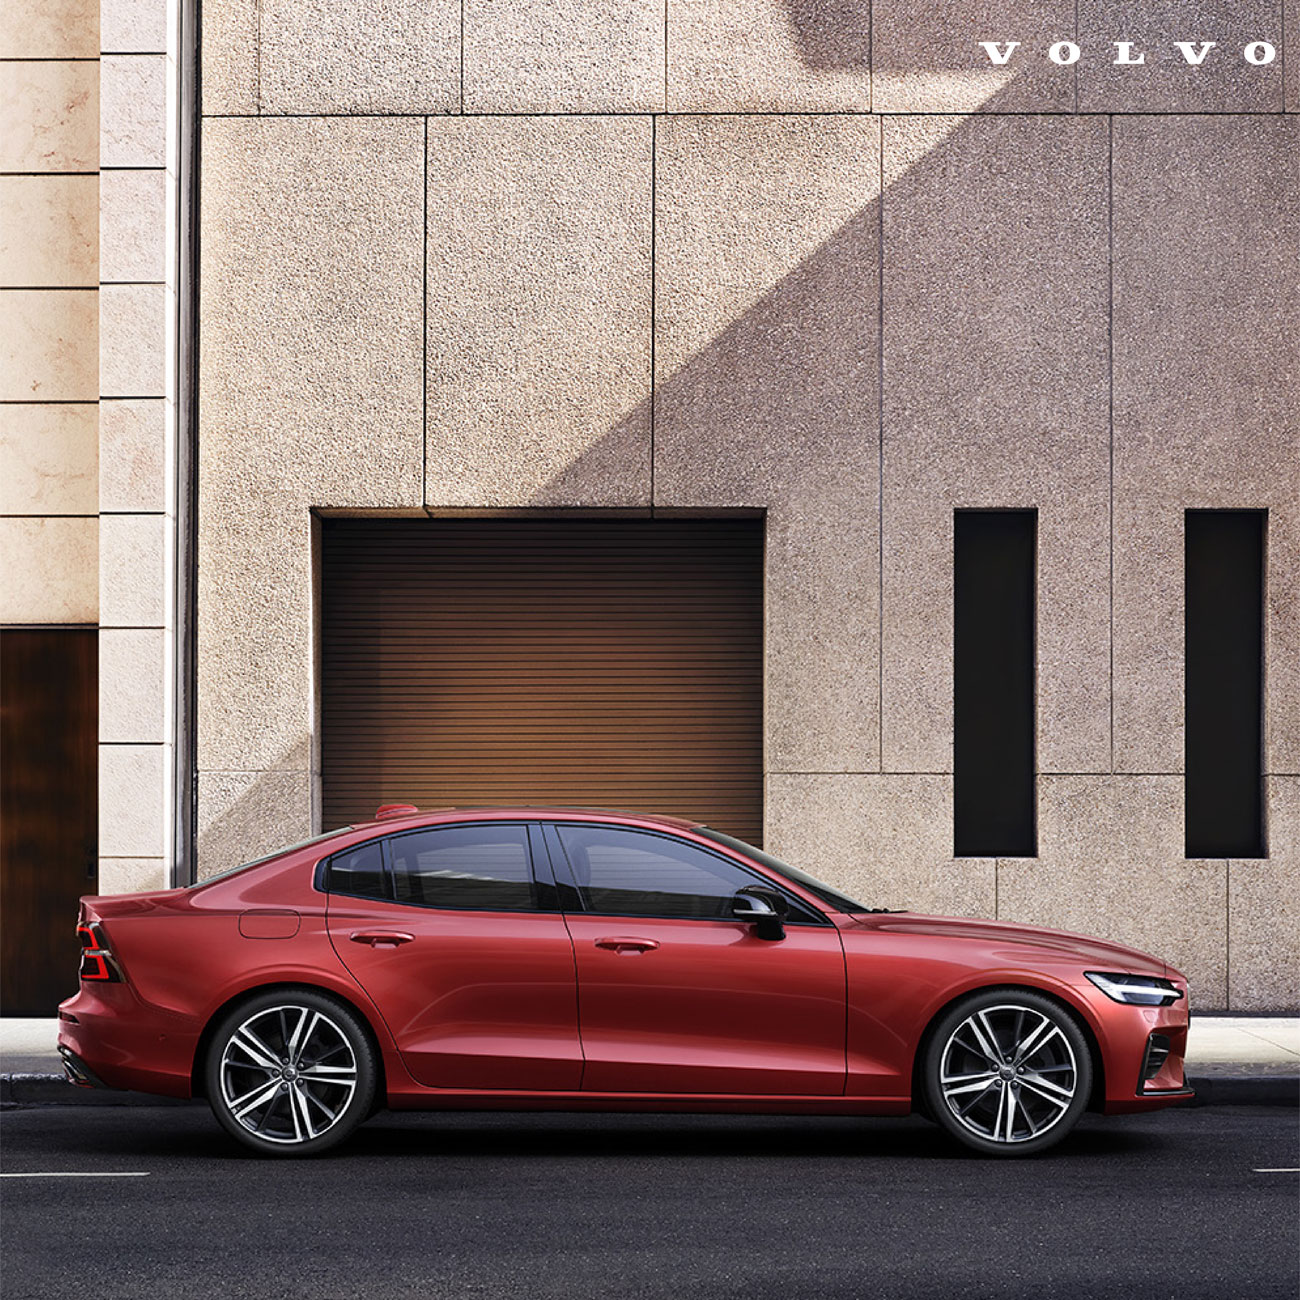 volvo-with-logo-02